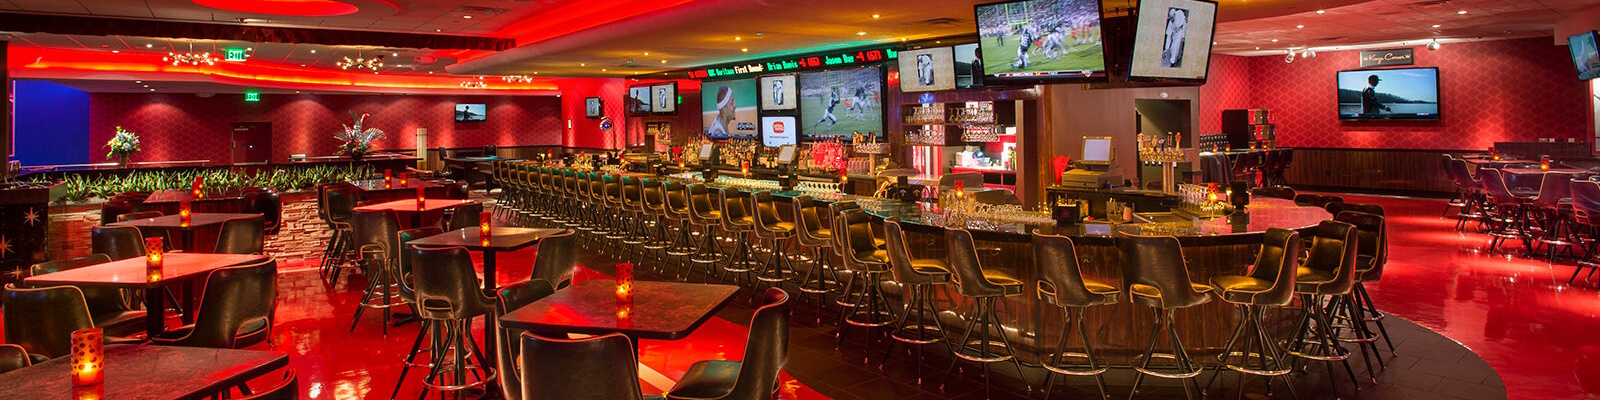 Kings Dining Entertainment Orlando Coupons